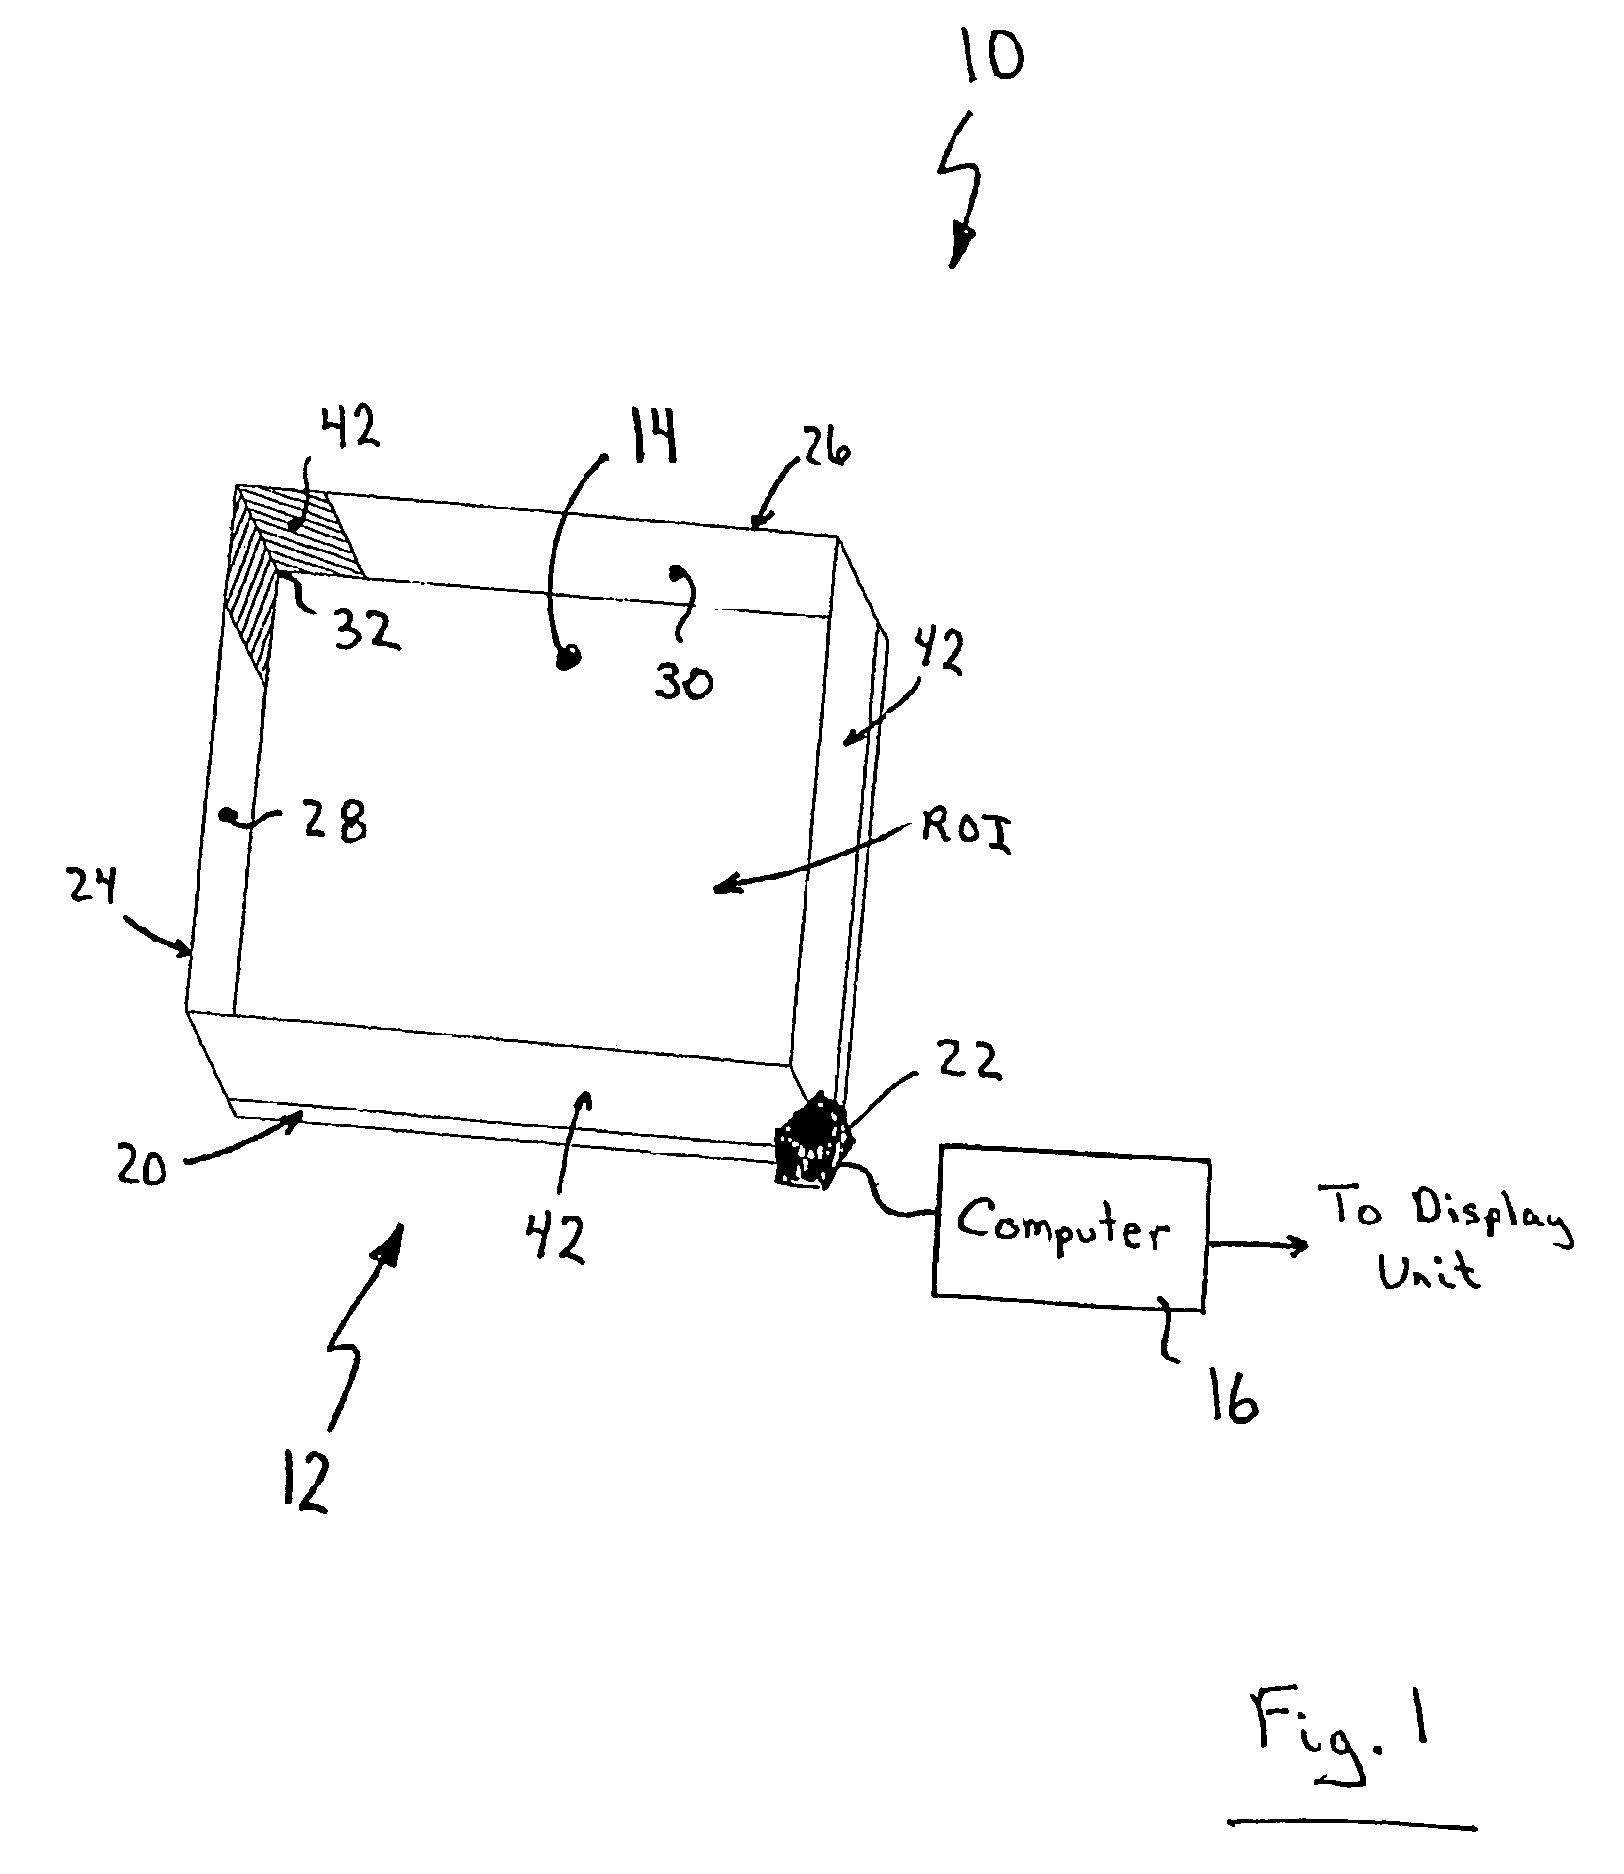 Apparatus for determining the location of a pointer within a region of interest